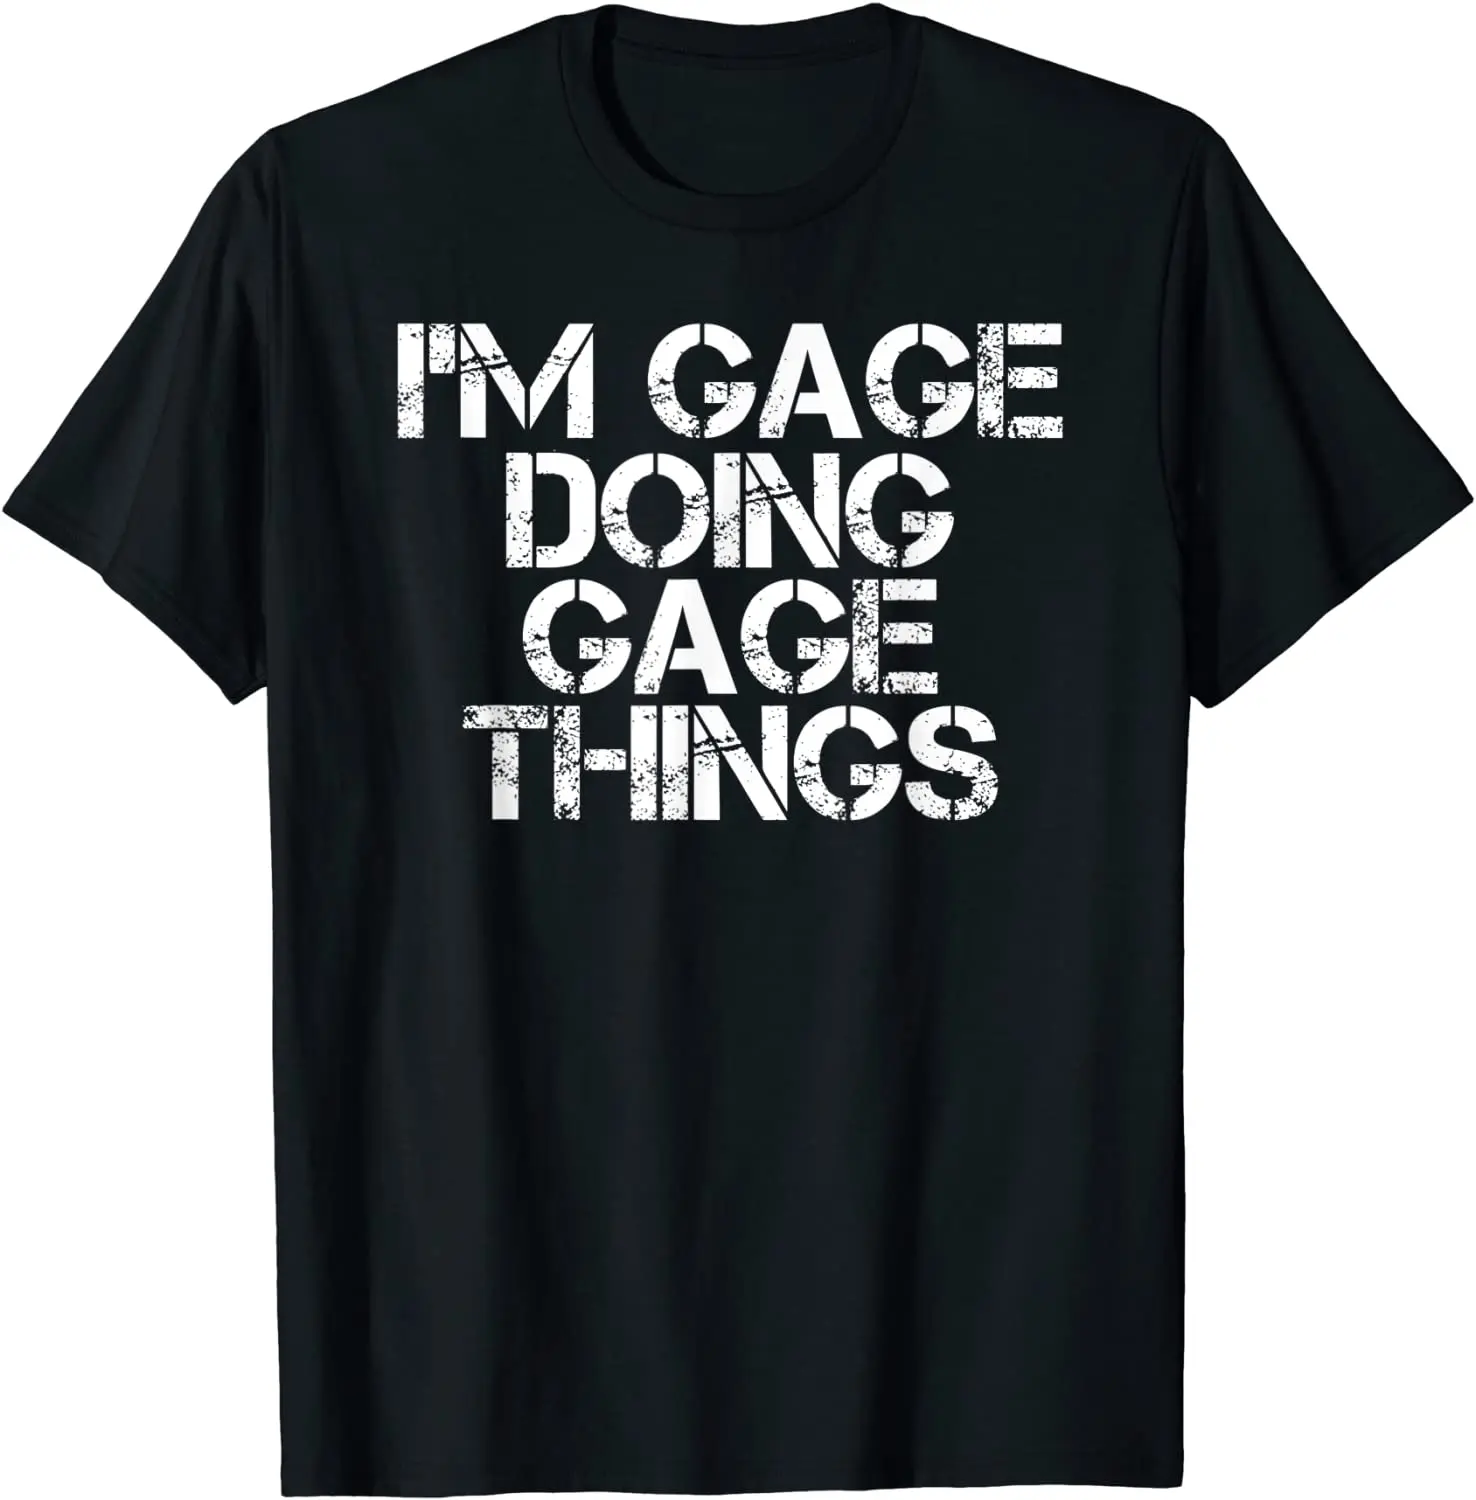 

I'M GAGE DOING GAGE THINGS Funny Birthday Name Gift Idea T-Shirt New Design Birthday Tops Shirt Cotton T Shirts for Boys Normal